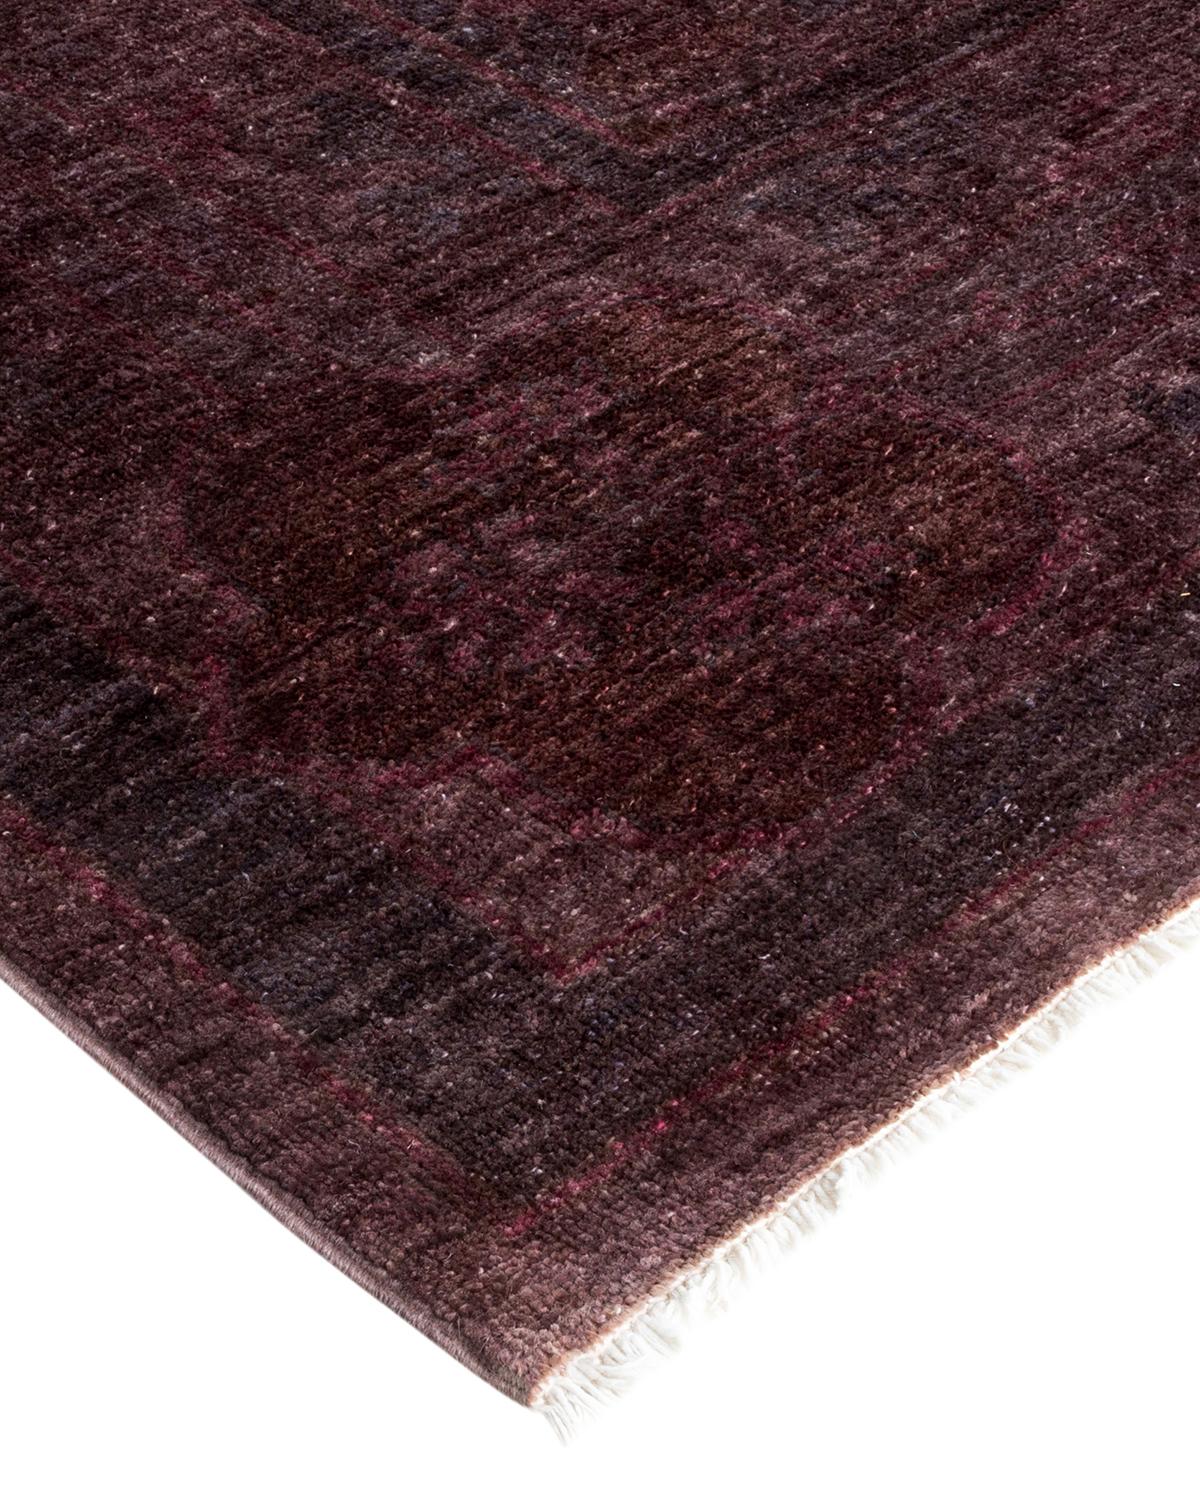 Vibrance rugs epitomize Classic with a twist: traditional patterns overdyed in brilliant color. Each hand knotted rug is washed in a 100%-natural botanical dye that reveals hidden nuances in the designs. These are rugs that transcend trends, and